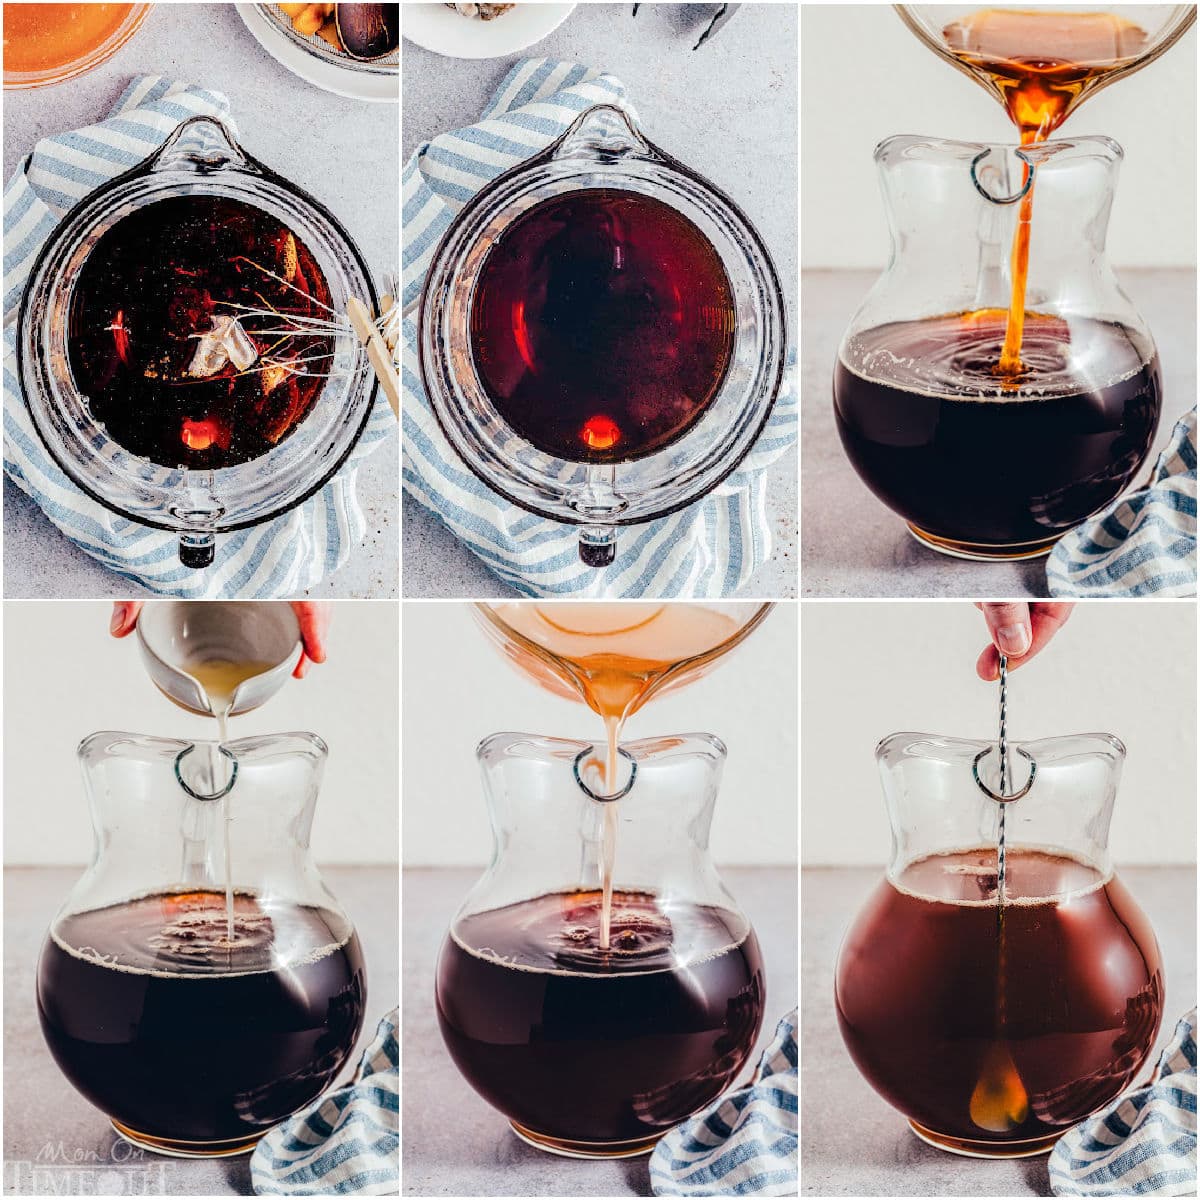 six image collage showing how to make peach tea step by step.